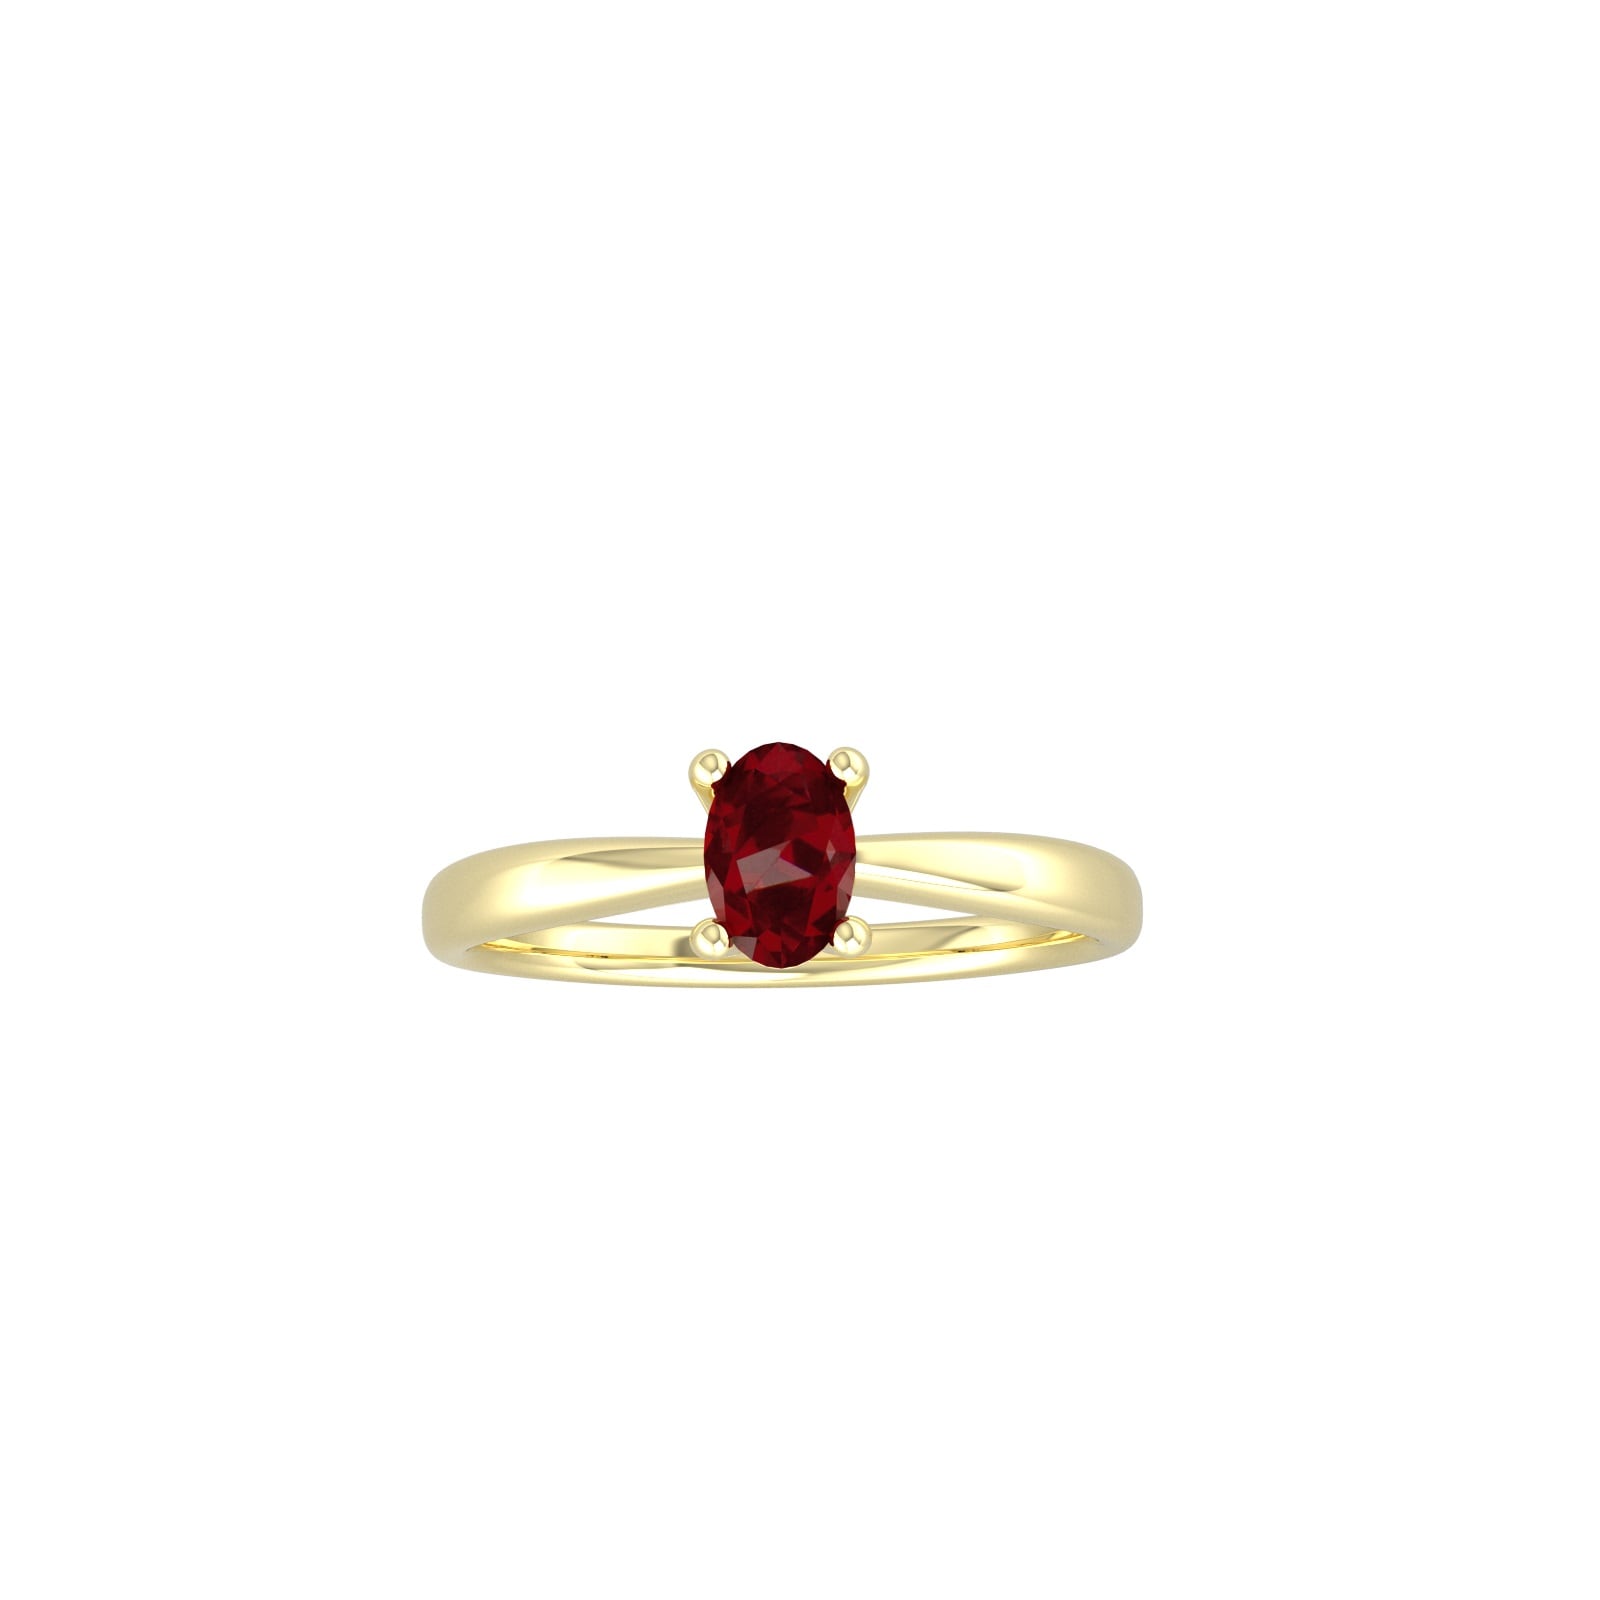 9ct Yellow Gold 4 Claw Oval Garnet Ring